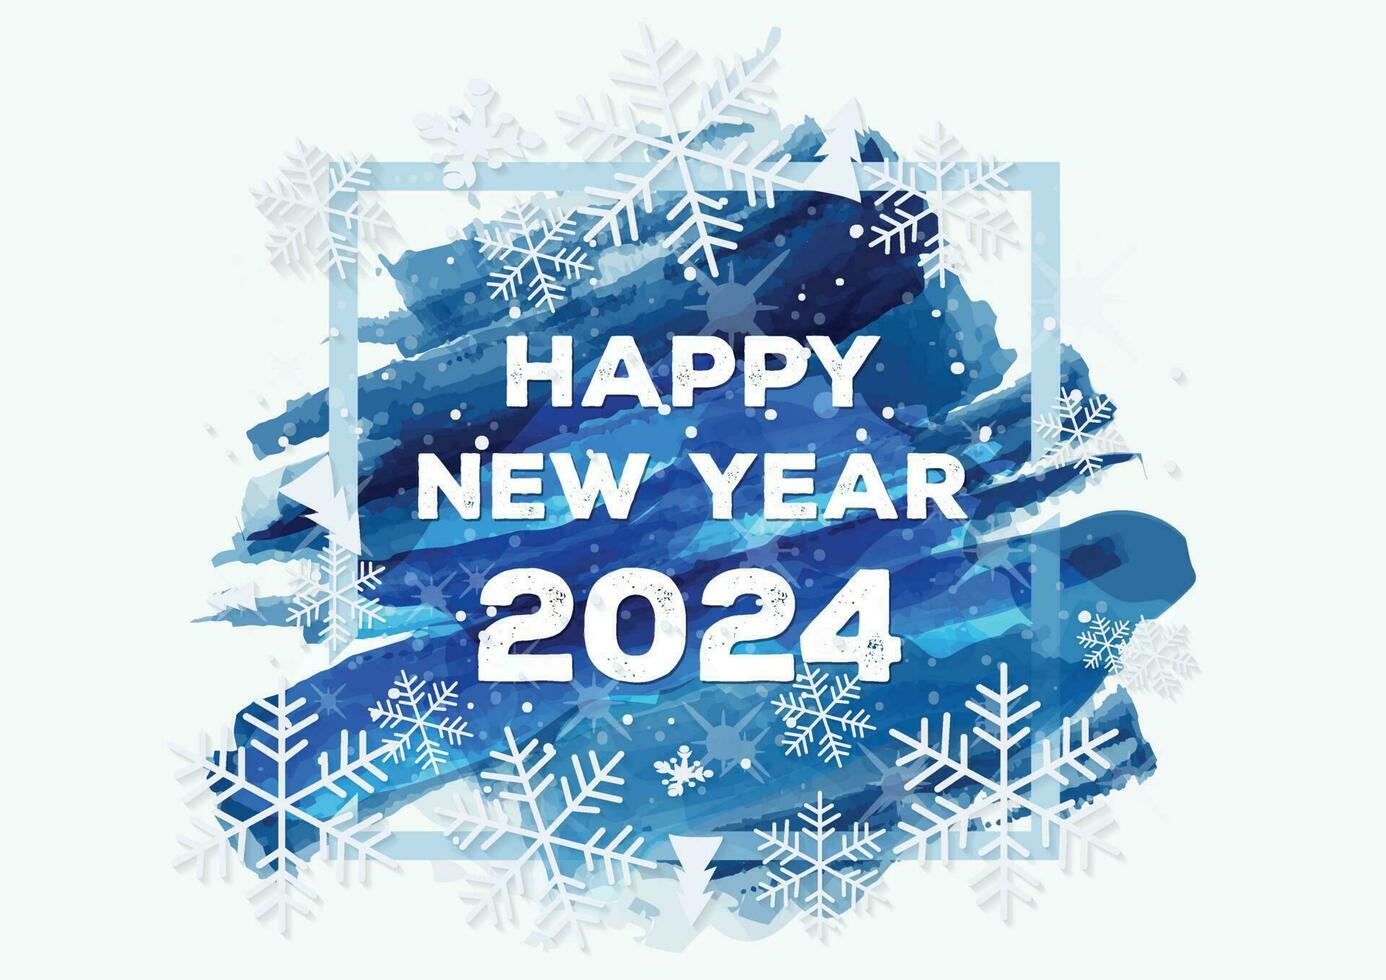 Colorful watercolor Happy New Year 2024 Background with blue brushstroke paint lettering calligraphy vector